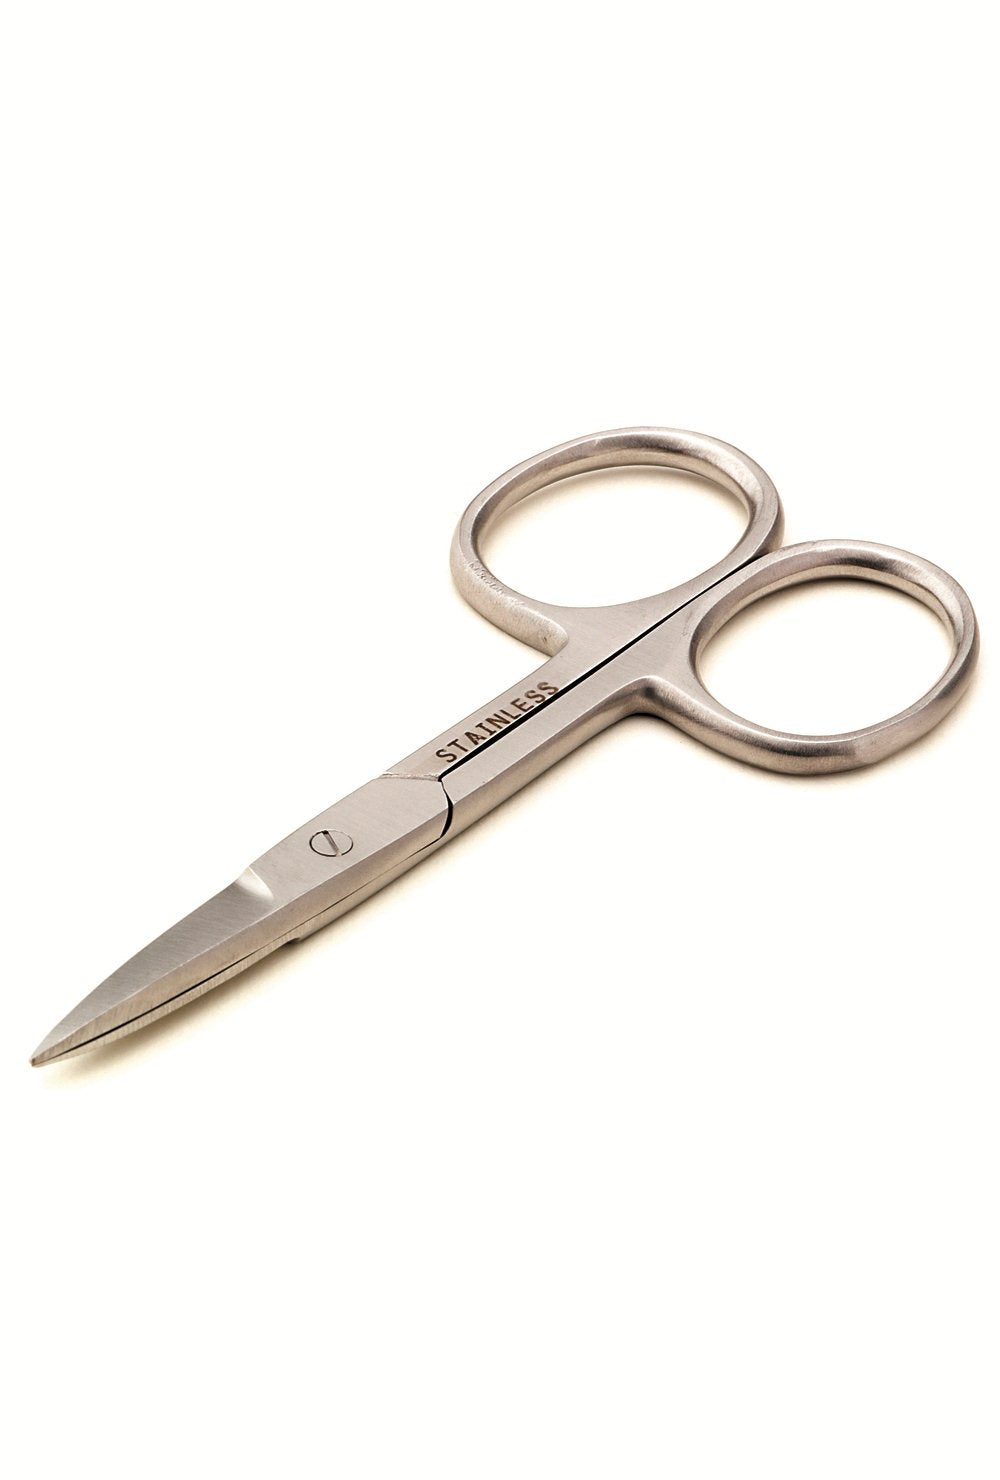 Strictly Professional Straight Nail Scissors - Ultimate Hair and Beauty